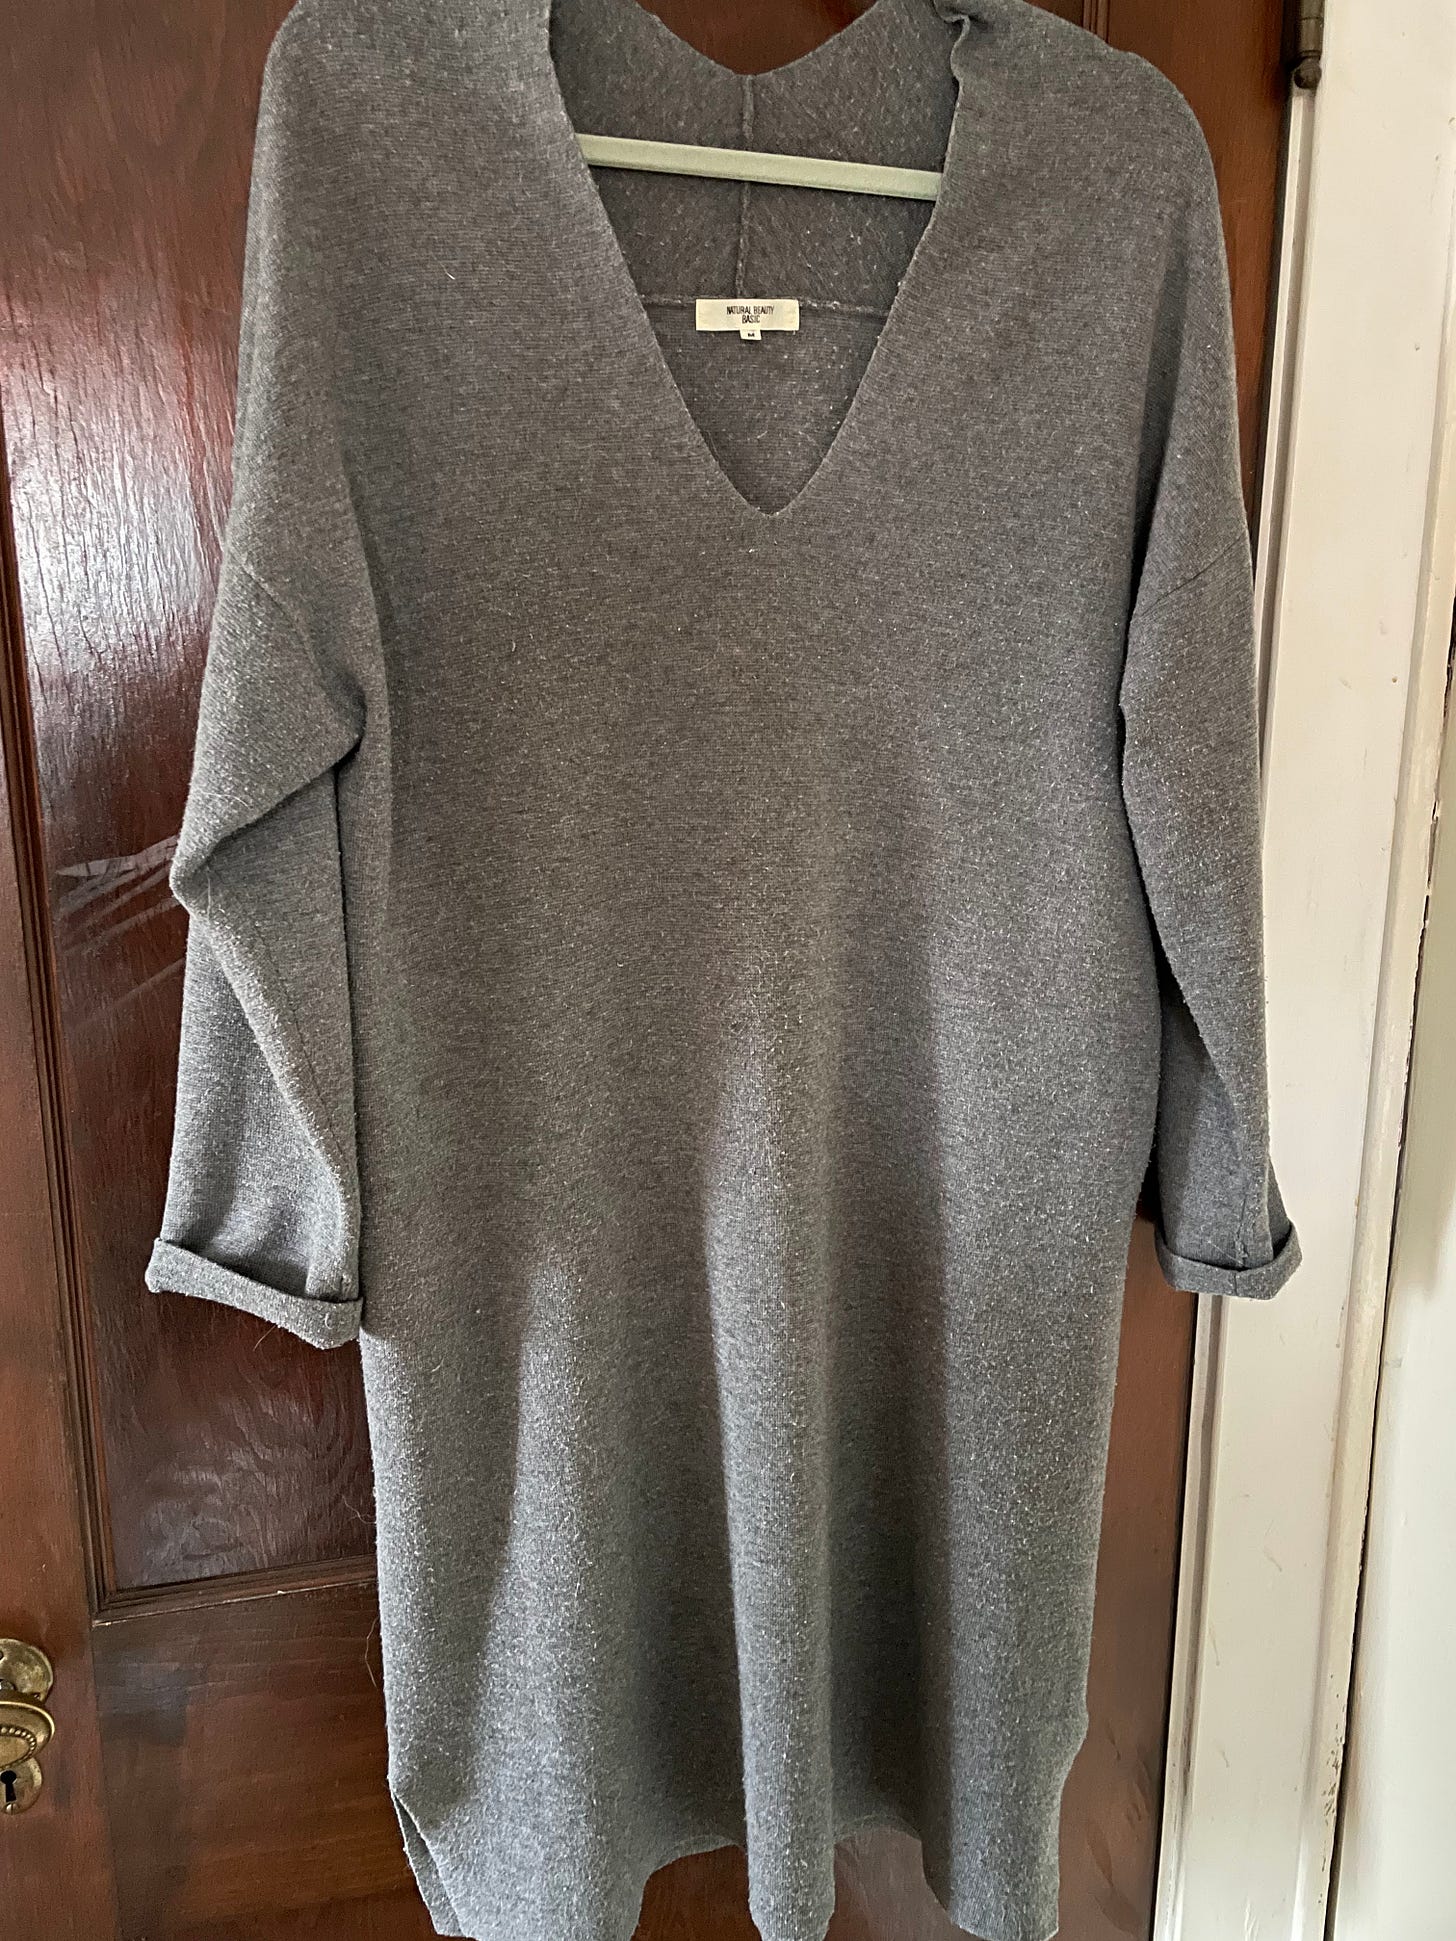 A gray knit dress with a v-shaped neckline hanging on a hook on a dark brown wood door